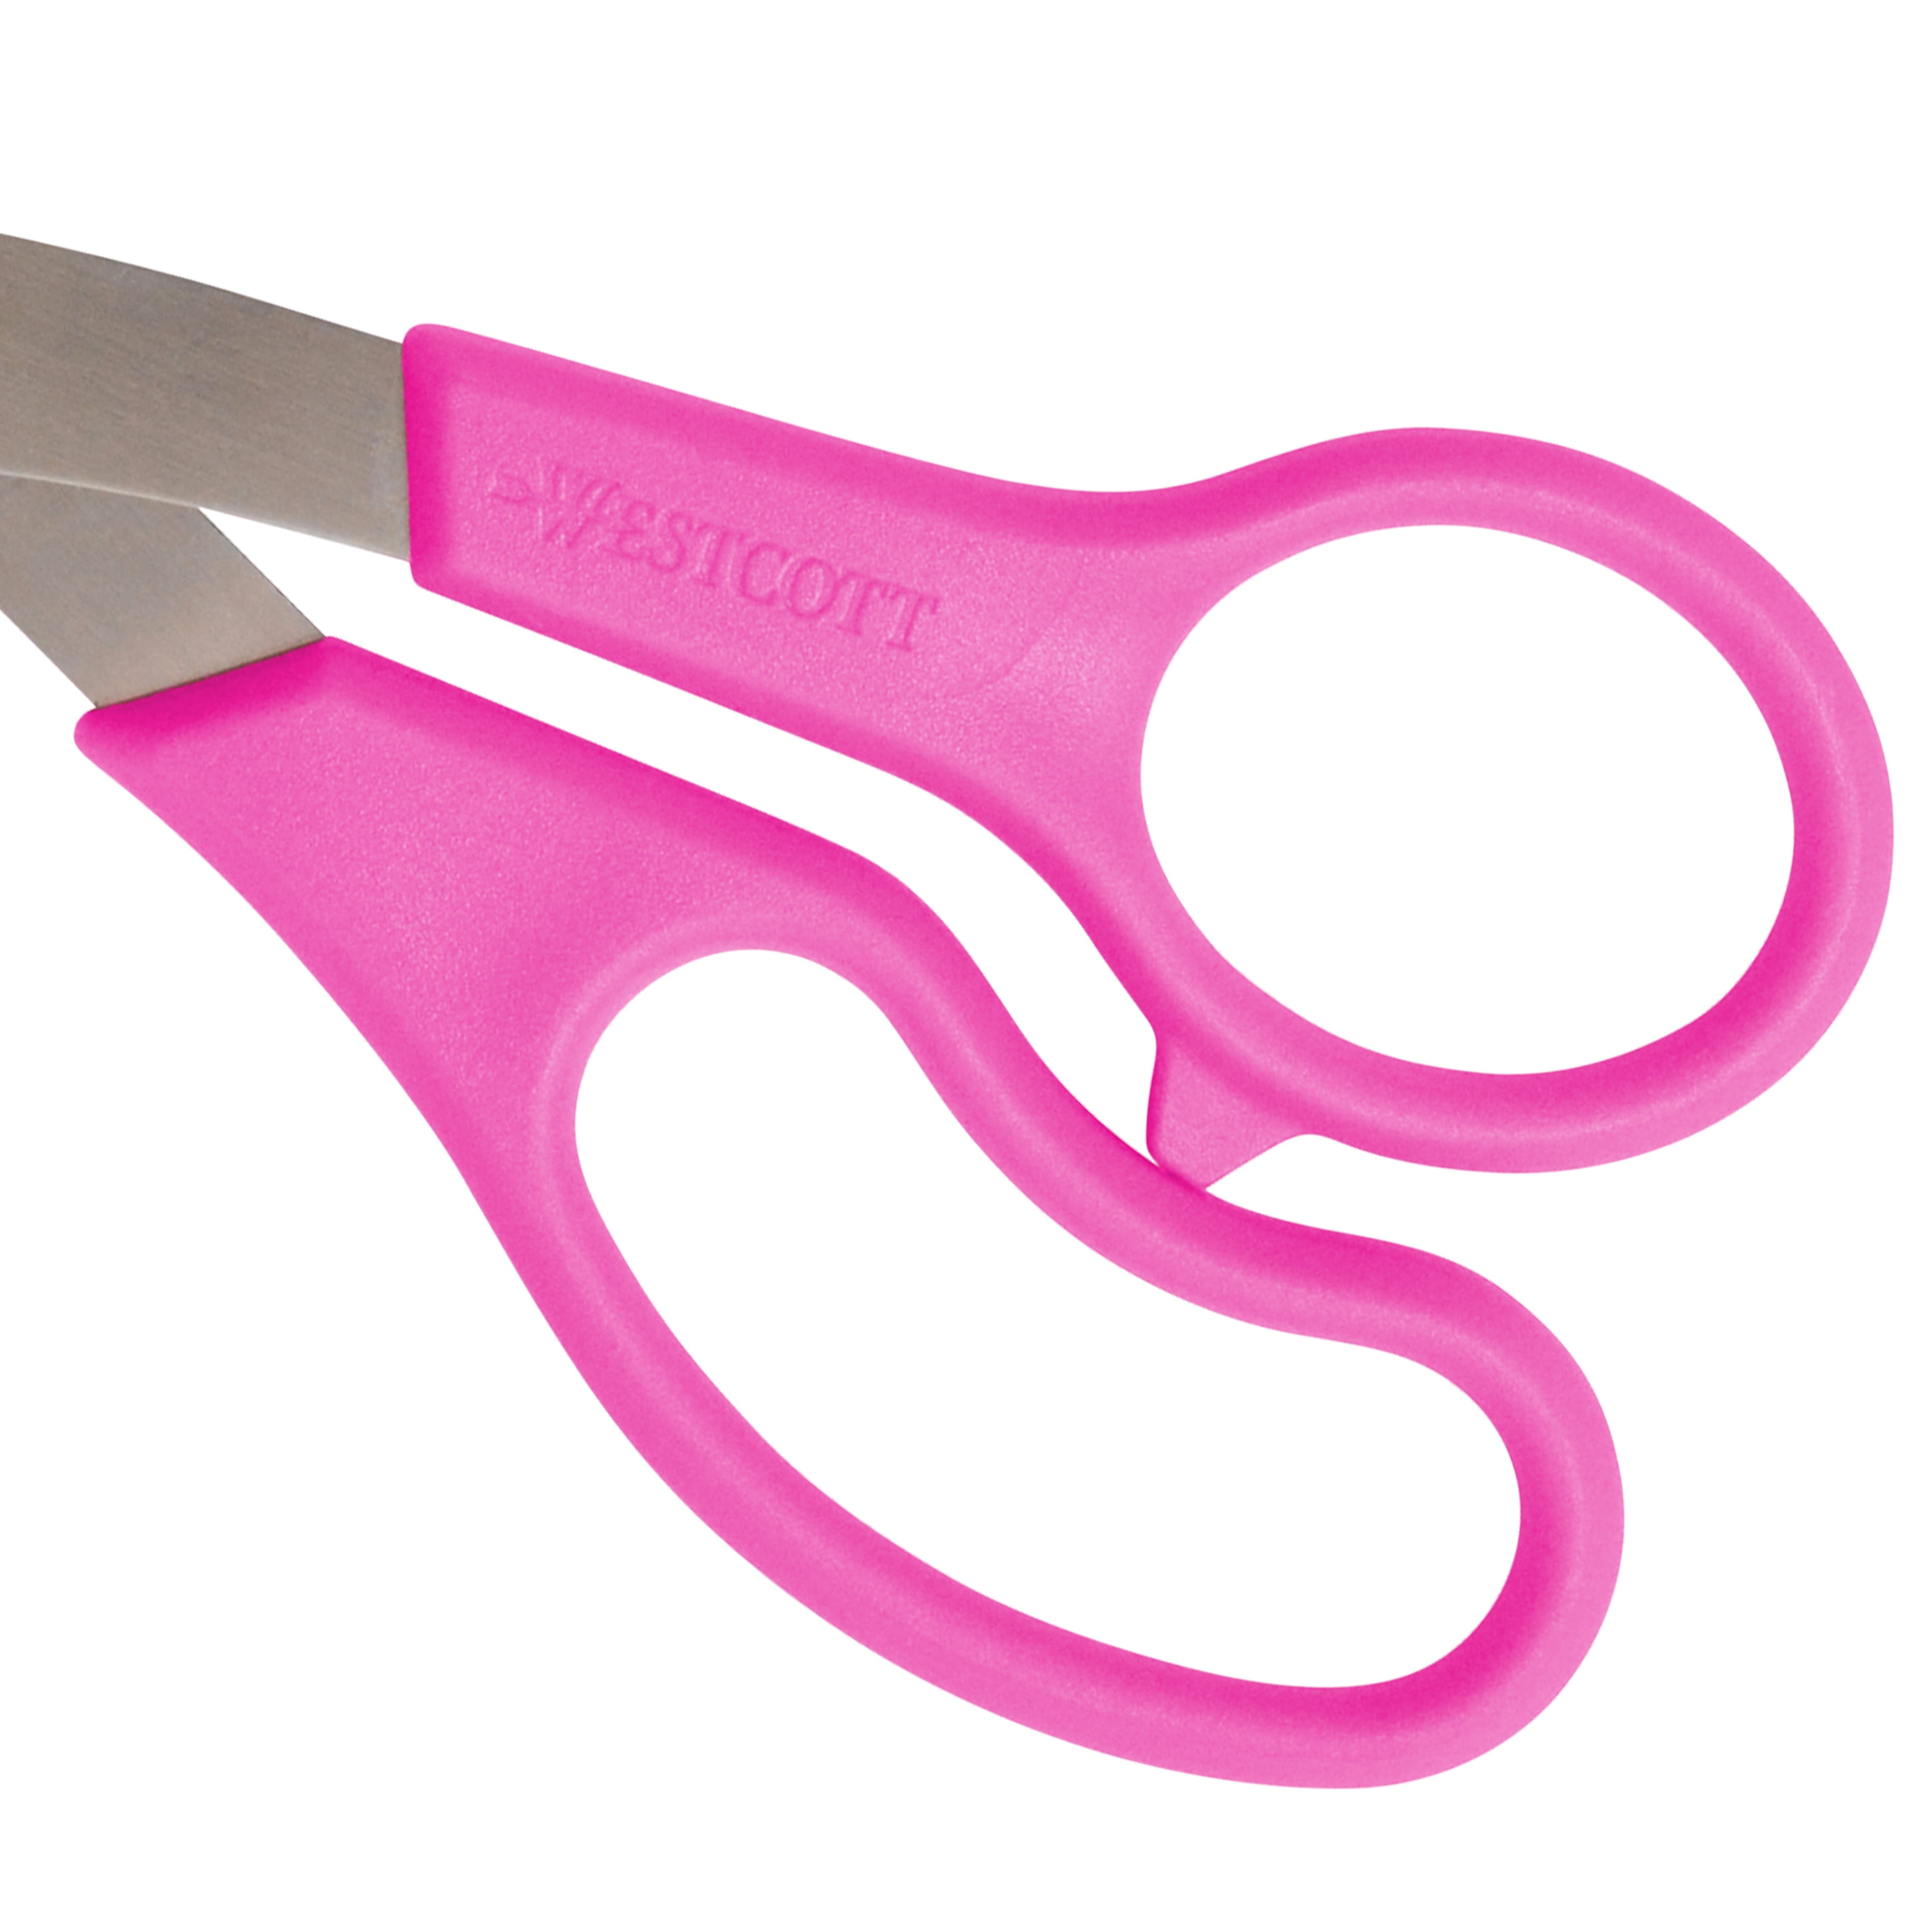 All Purpose Pink Ribbon Scissors, 8 inch Long, 3.5 inch Cut Length, Pink Straight Handle | Bundle of 2 Each